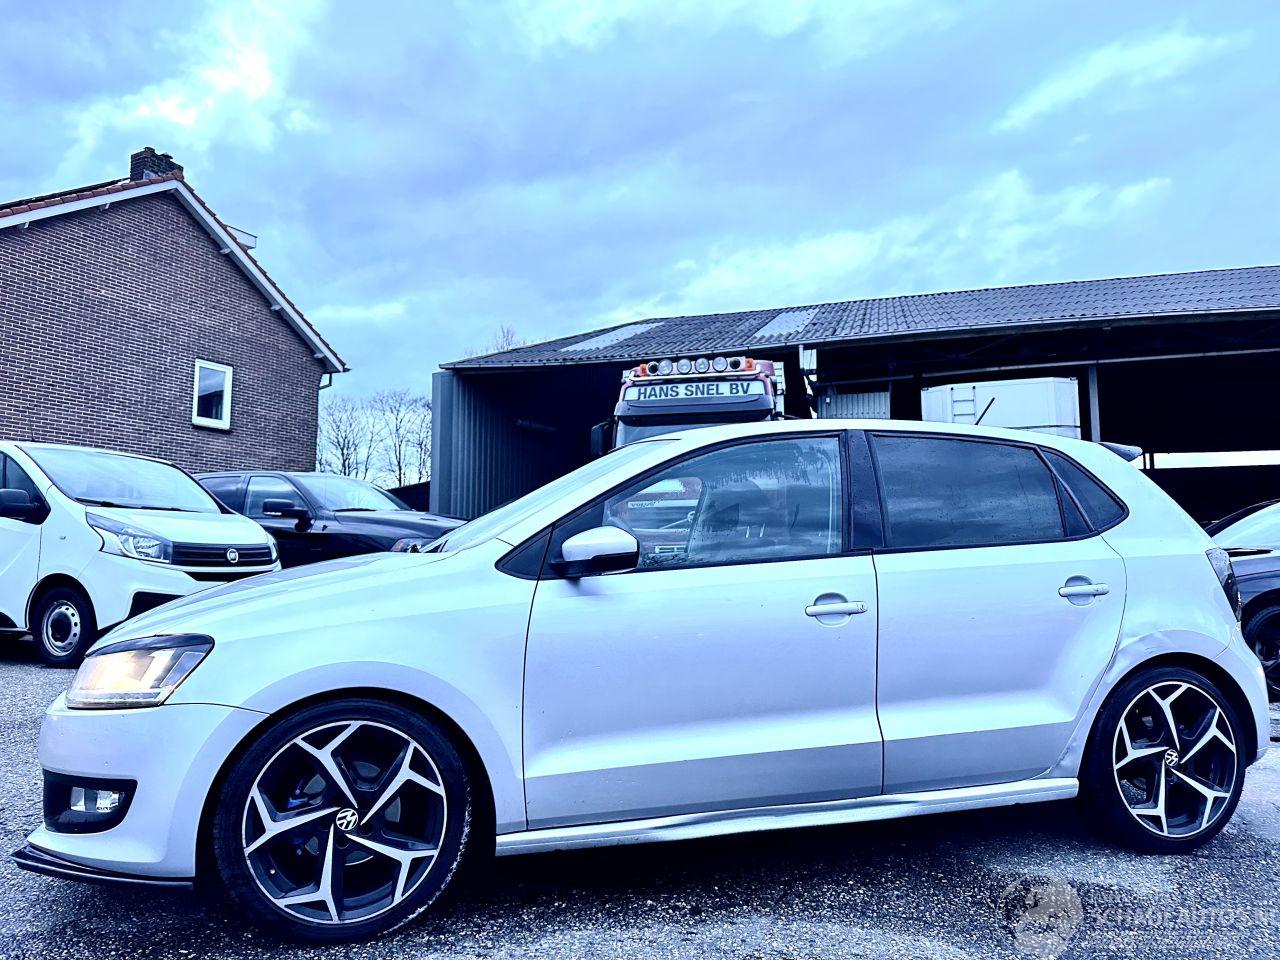 Volkswagen Polo gereserveerd 1.2 TSI 90pk 5drs - nap - navi - clima - cruise - pdc - JD Engineering - maxton - led voor + achter